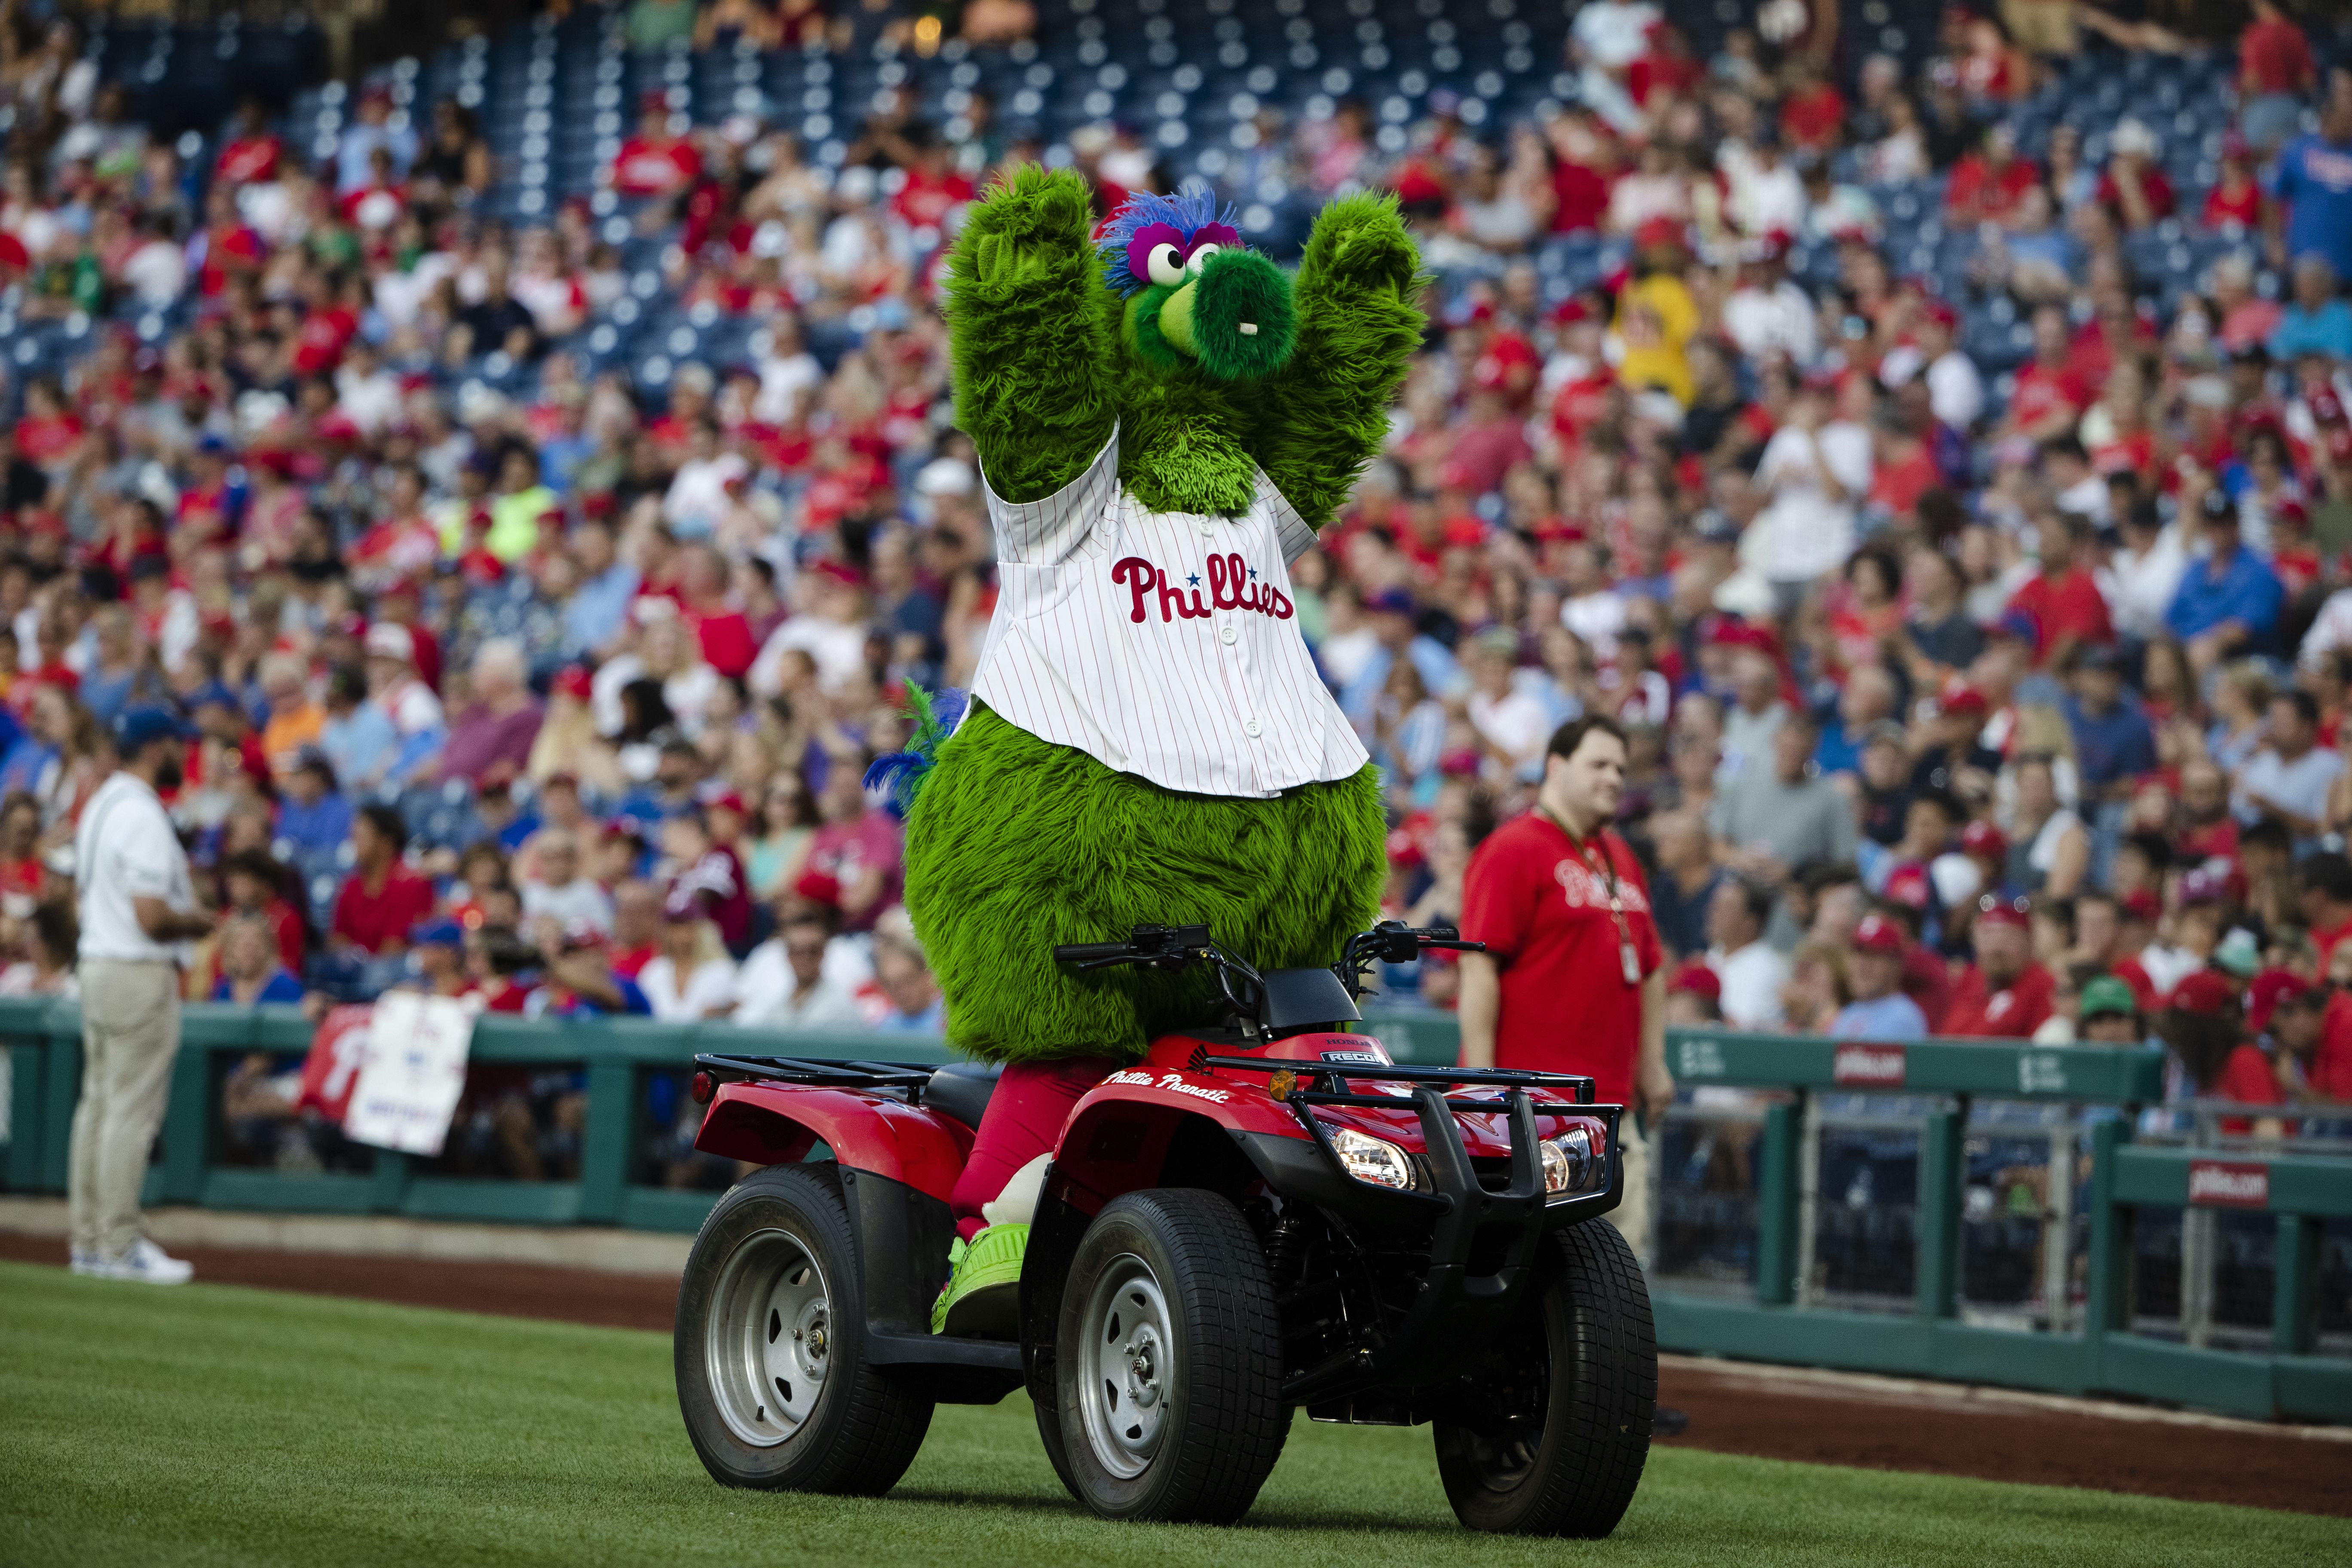 Say it ain't so! Phillie Phanatic is getting a makeover 